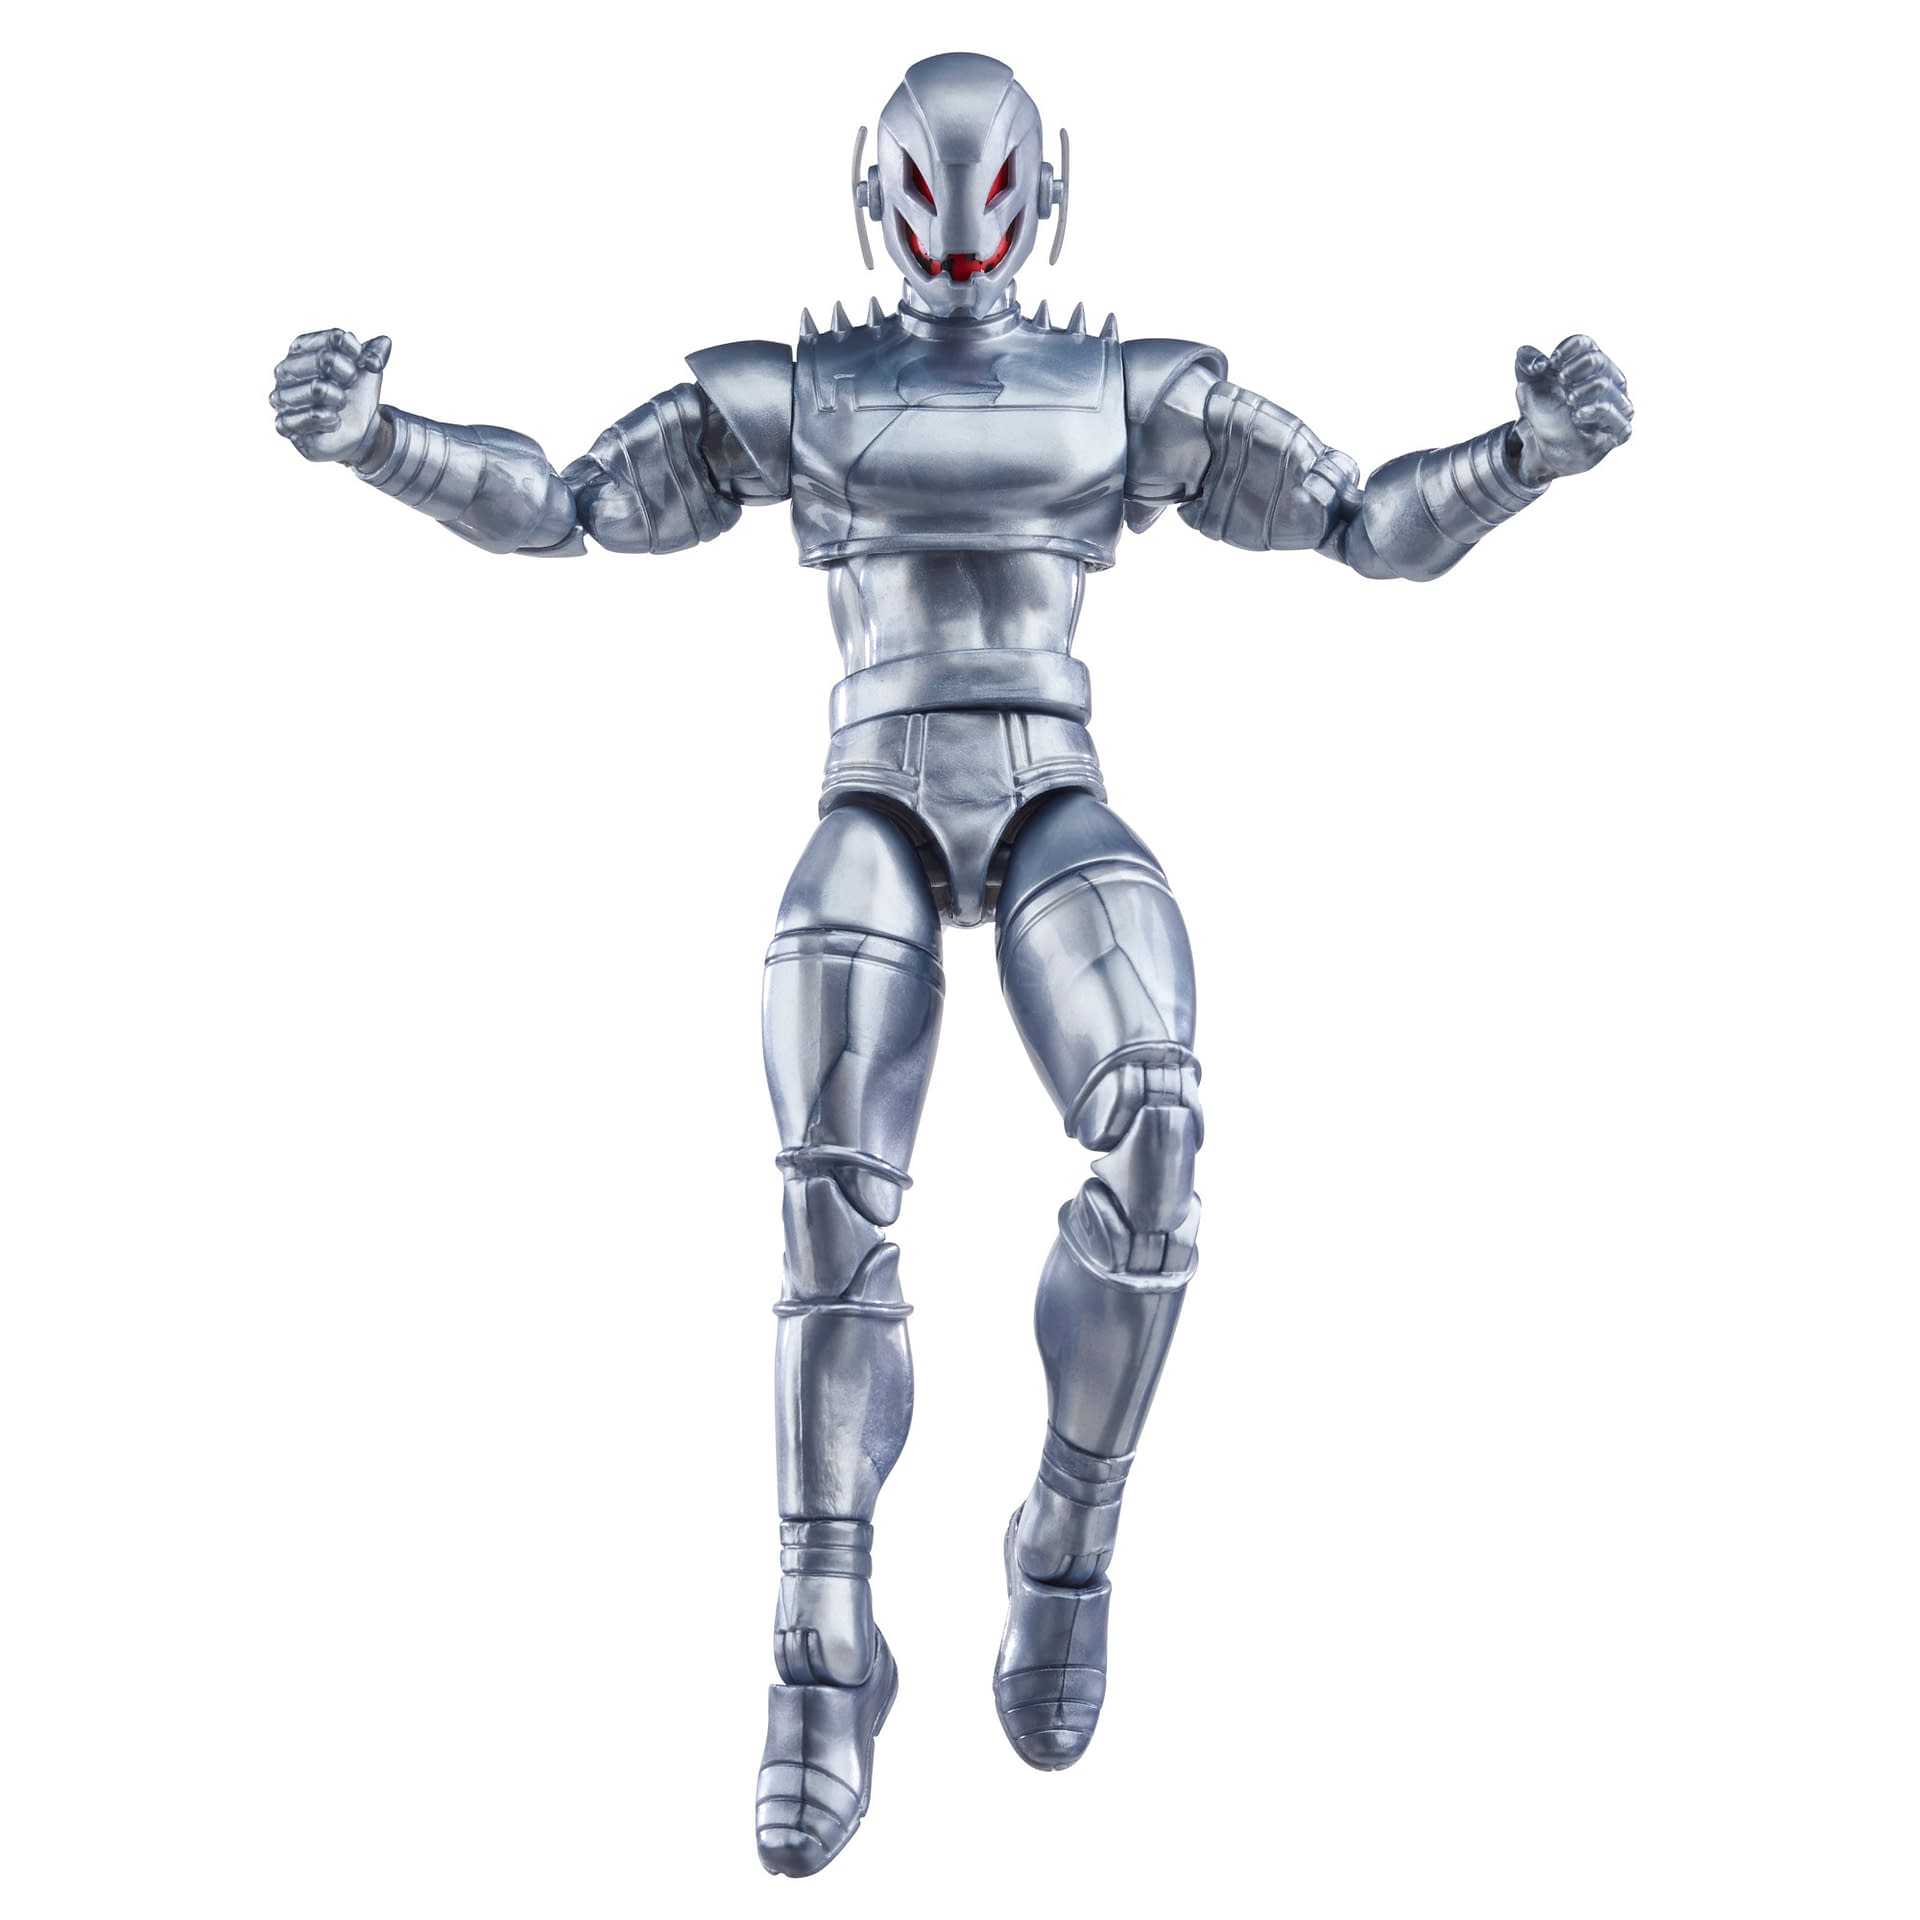 Ultron is Back Wants Revenge with Hasbro's Newets Marvel Legends 